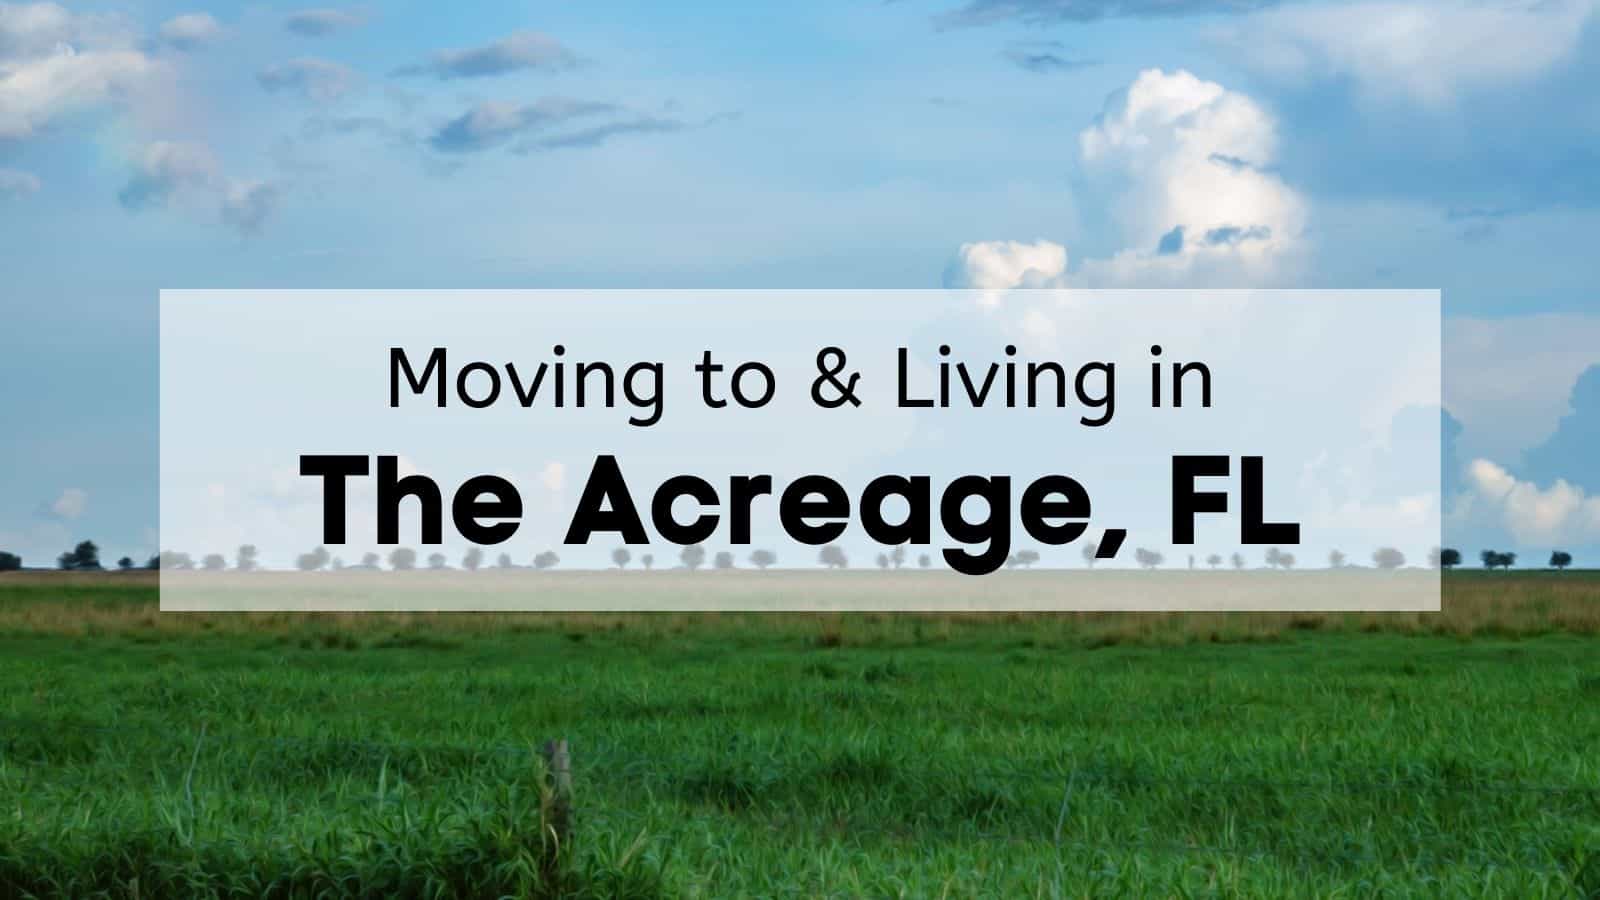 Moving to & Living in The Acreage, FL